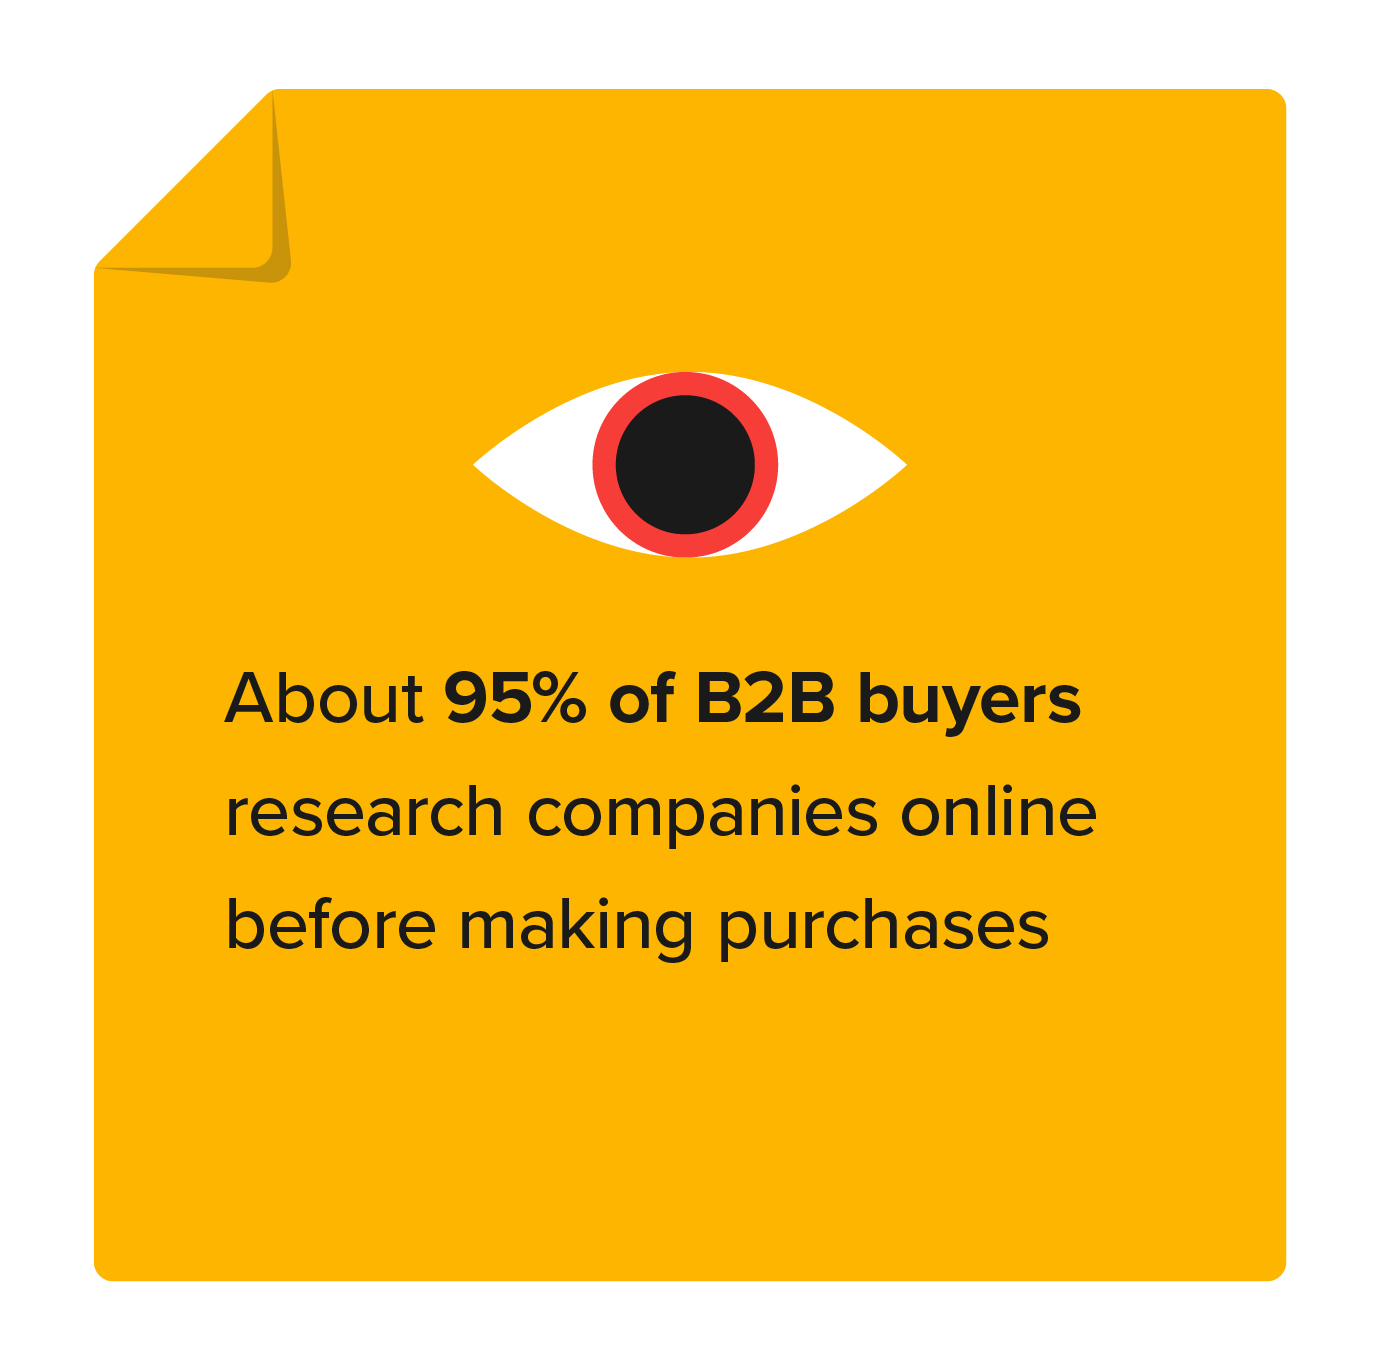 B2B buyers research products online